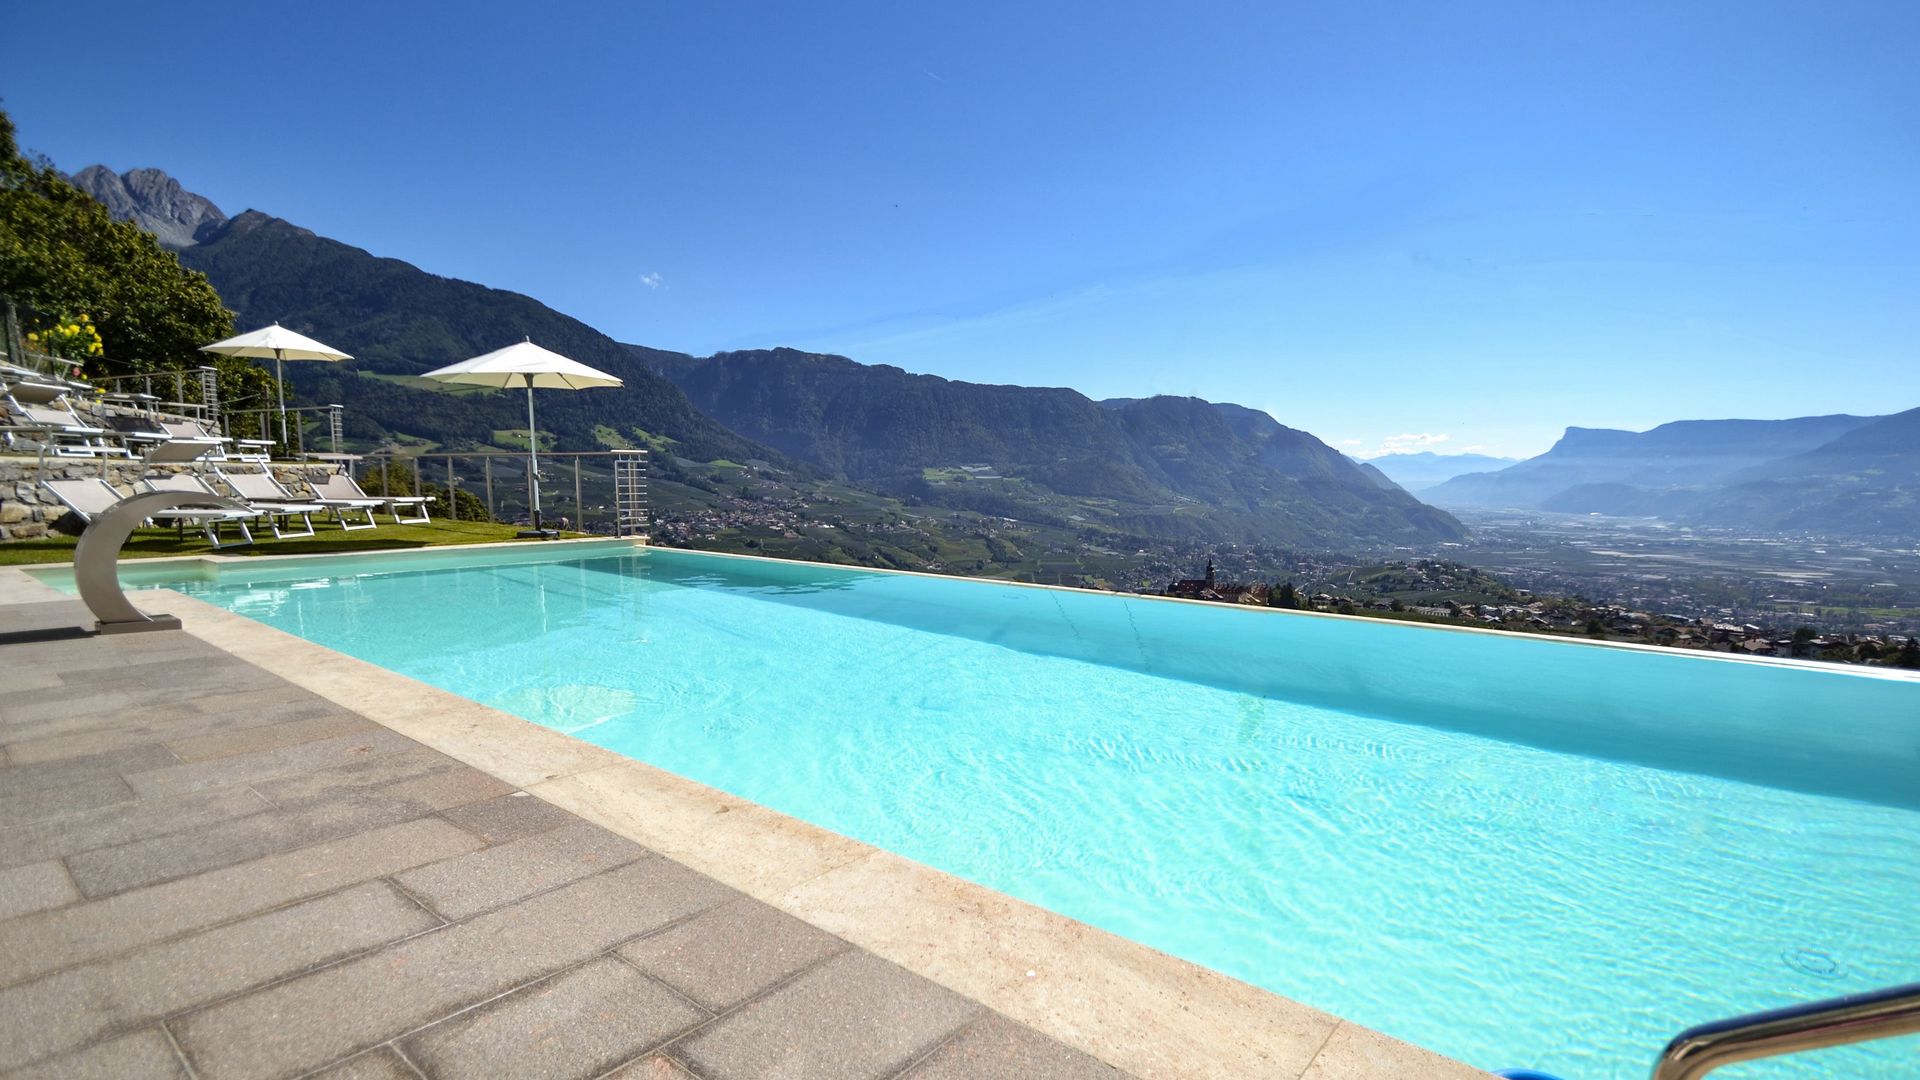 Hotel Lechner Panorama Infinity Pool Swimming Pool View